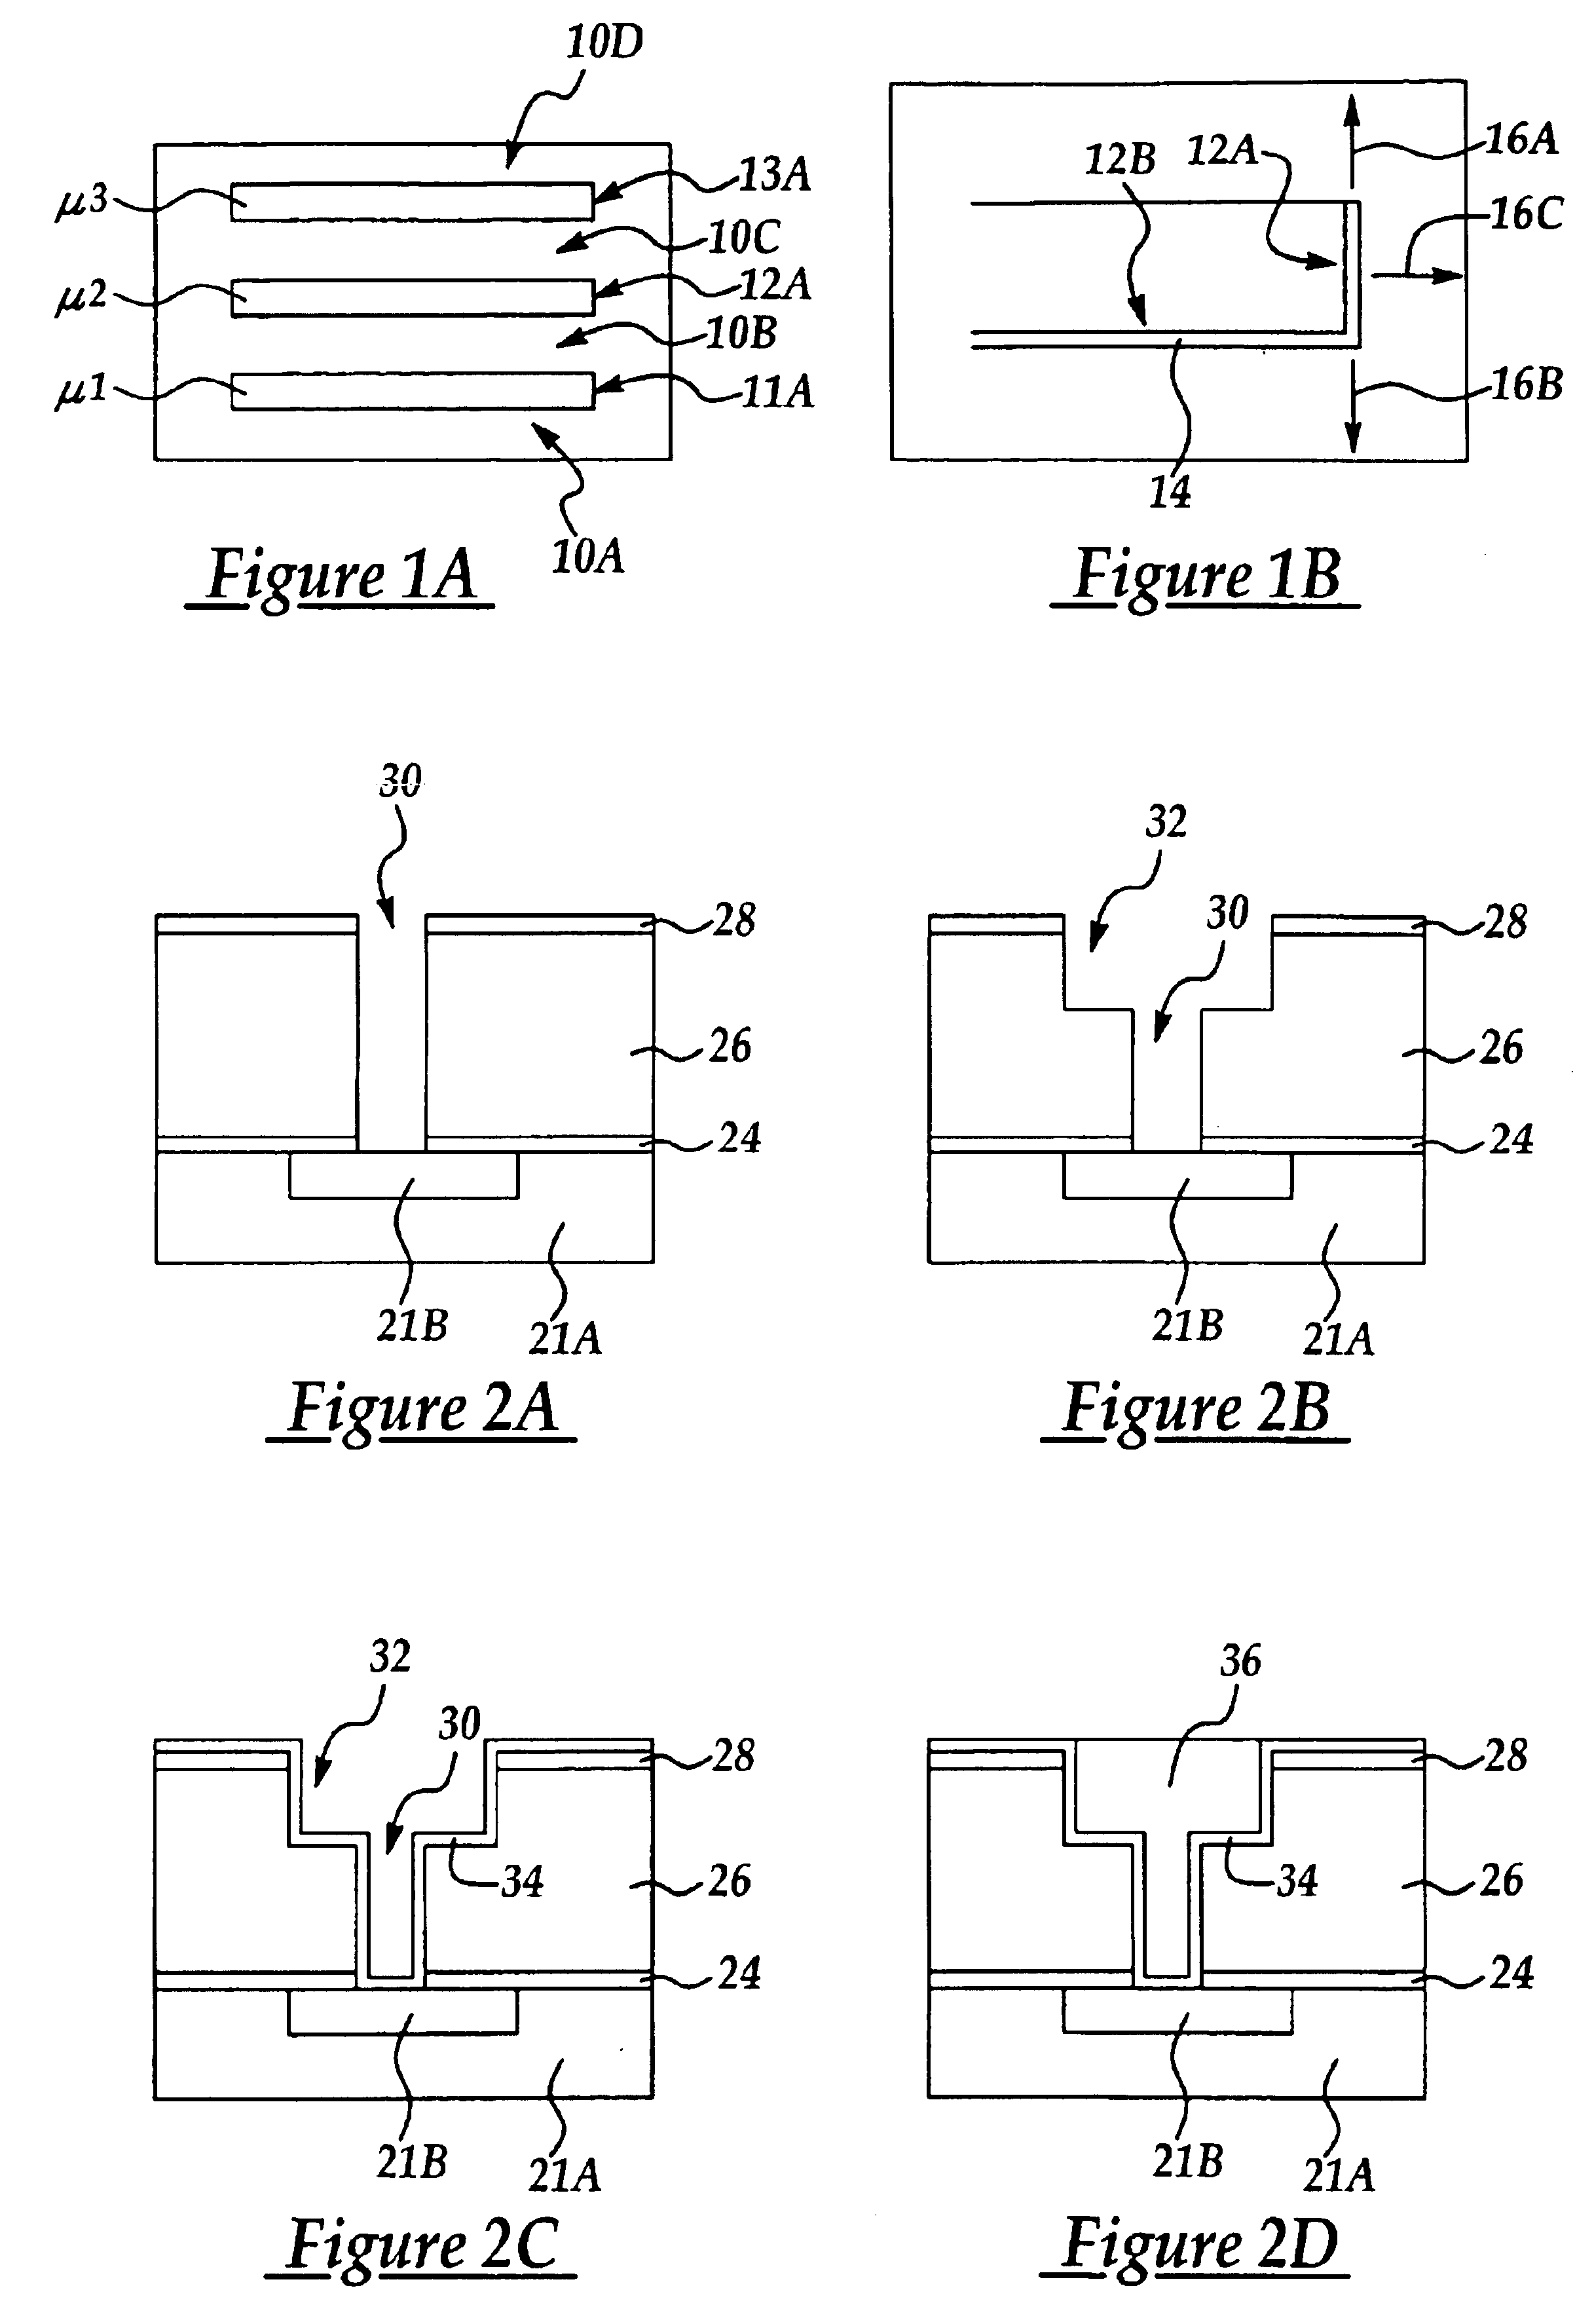 Method for preventing low-k dielectric layer cracking in multi-layered dual damascene metallization layers